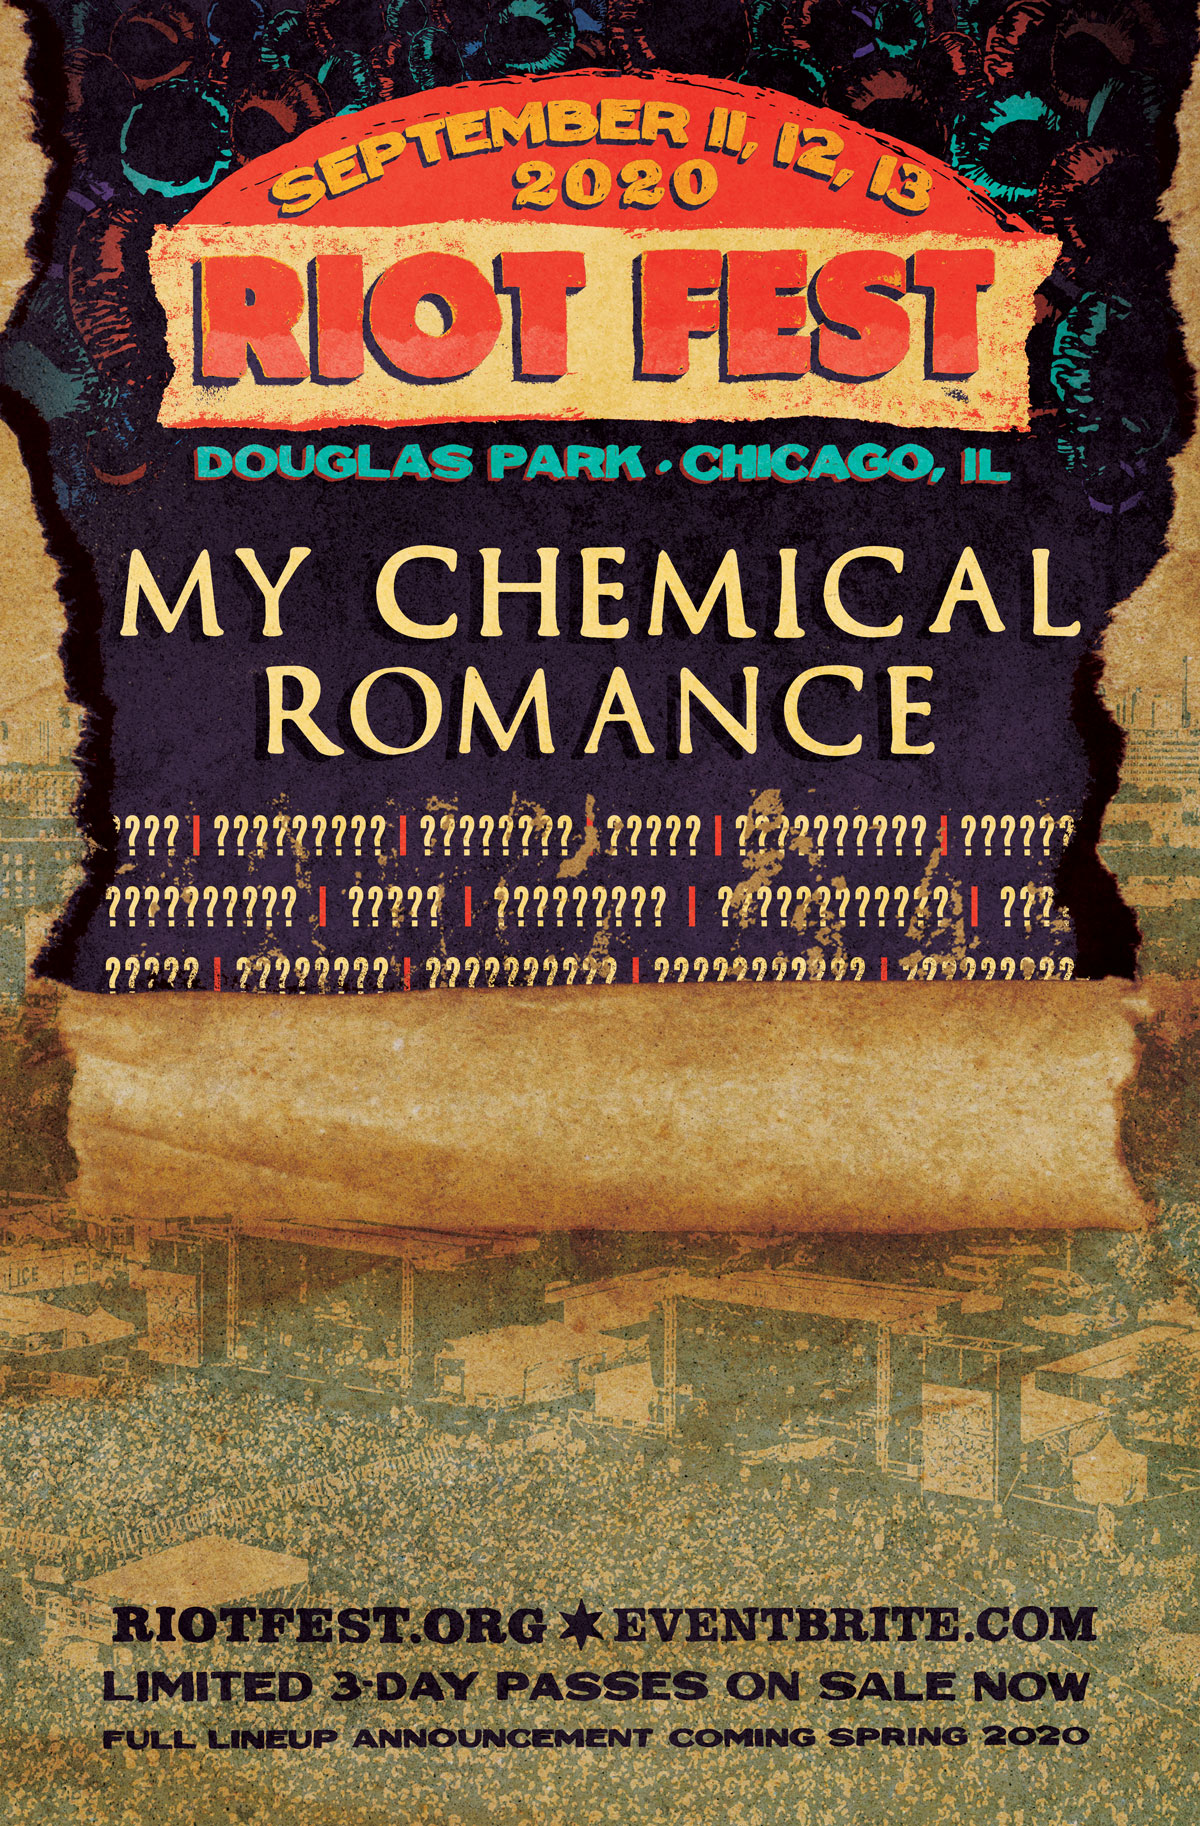 My Chemical Romance on X: See you at @RiotFest 2022. September